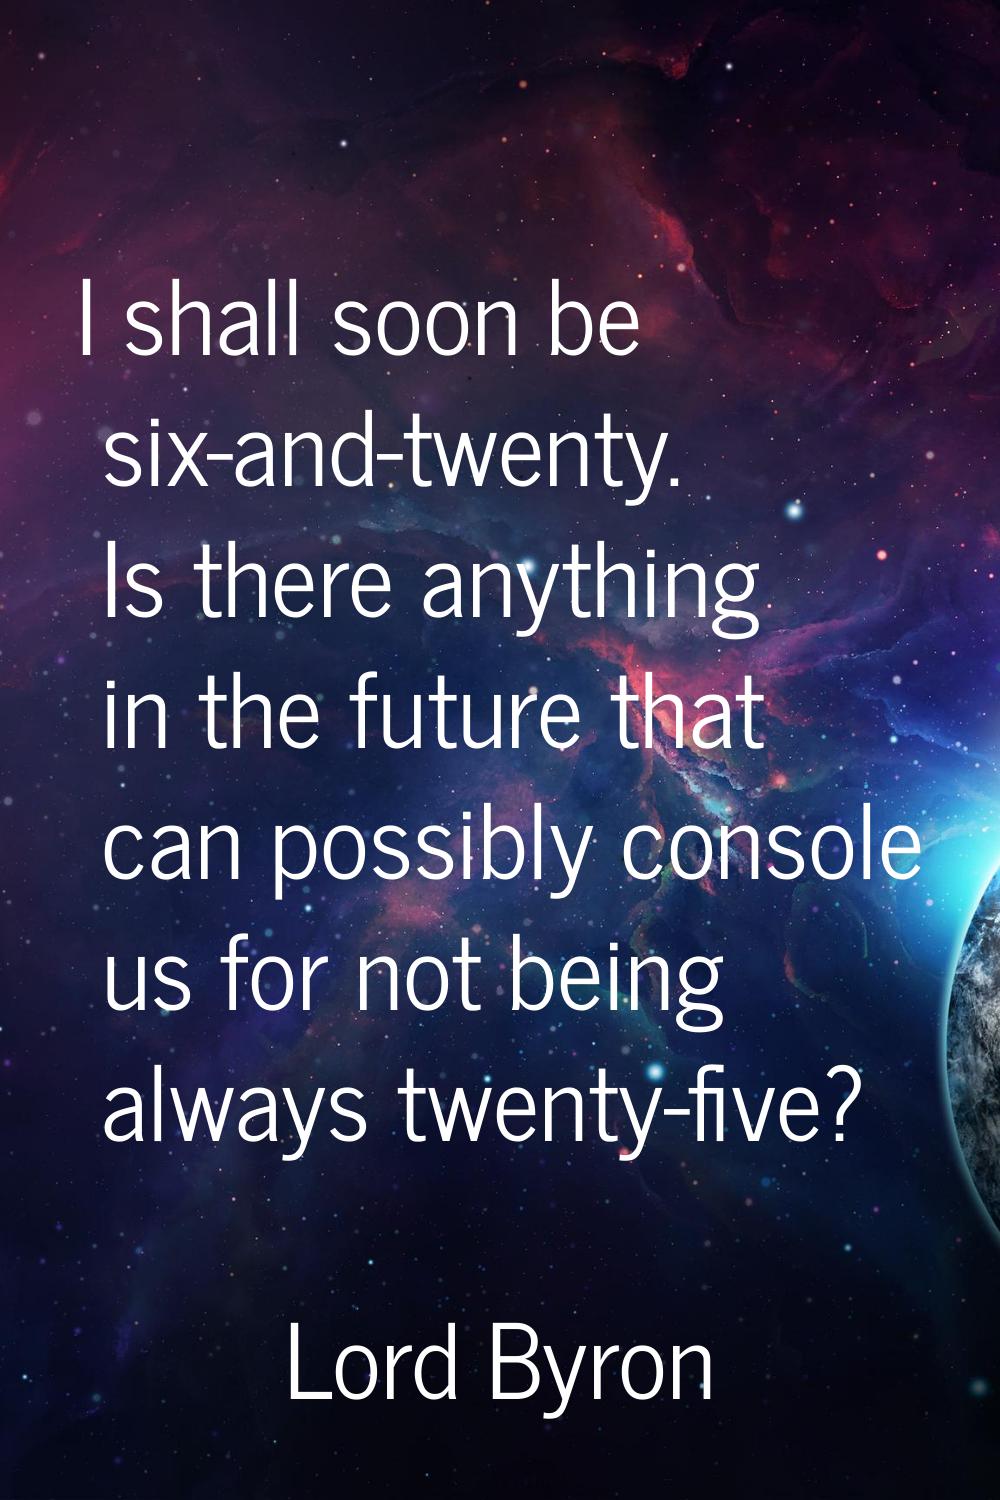 I shall soon be six-and-twenty. Is there anything in the future that can possibly console us for no